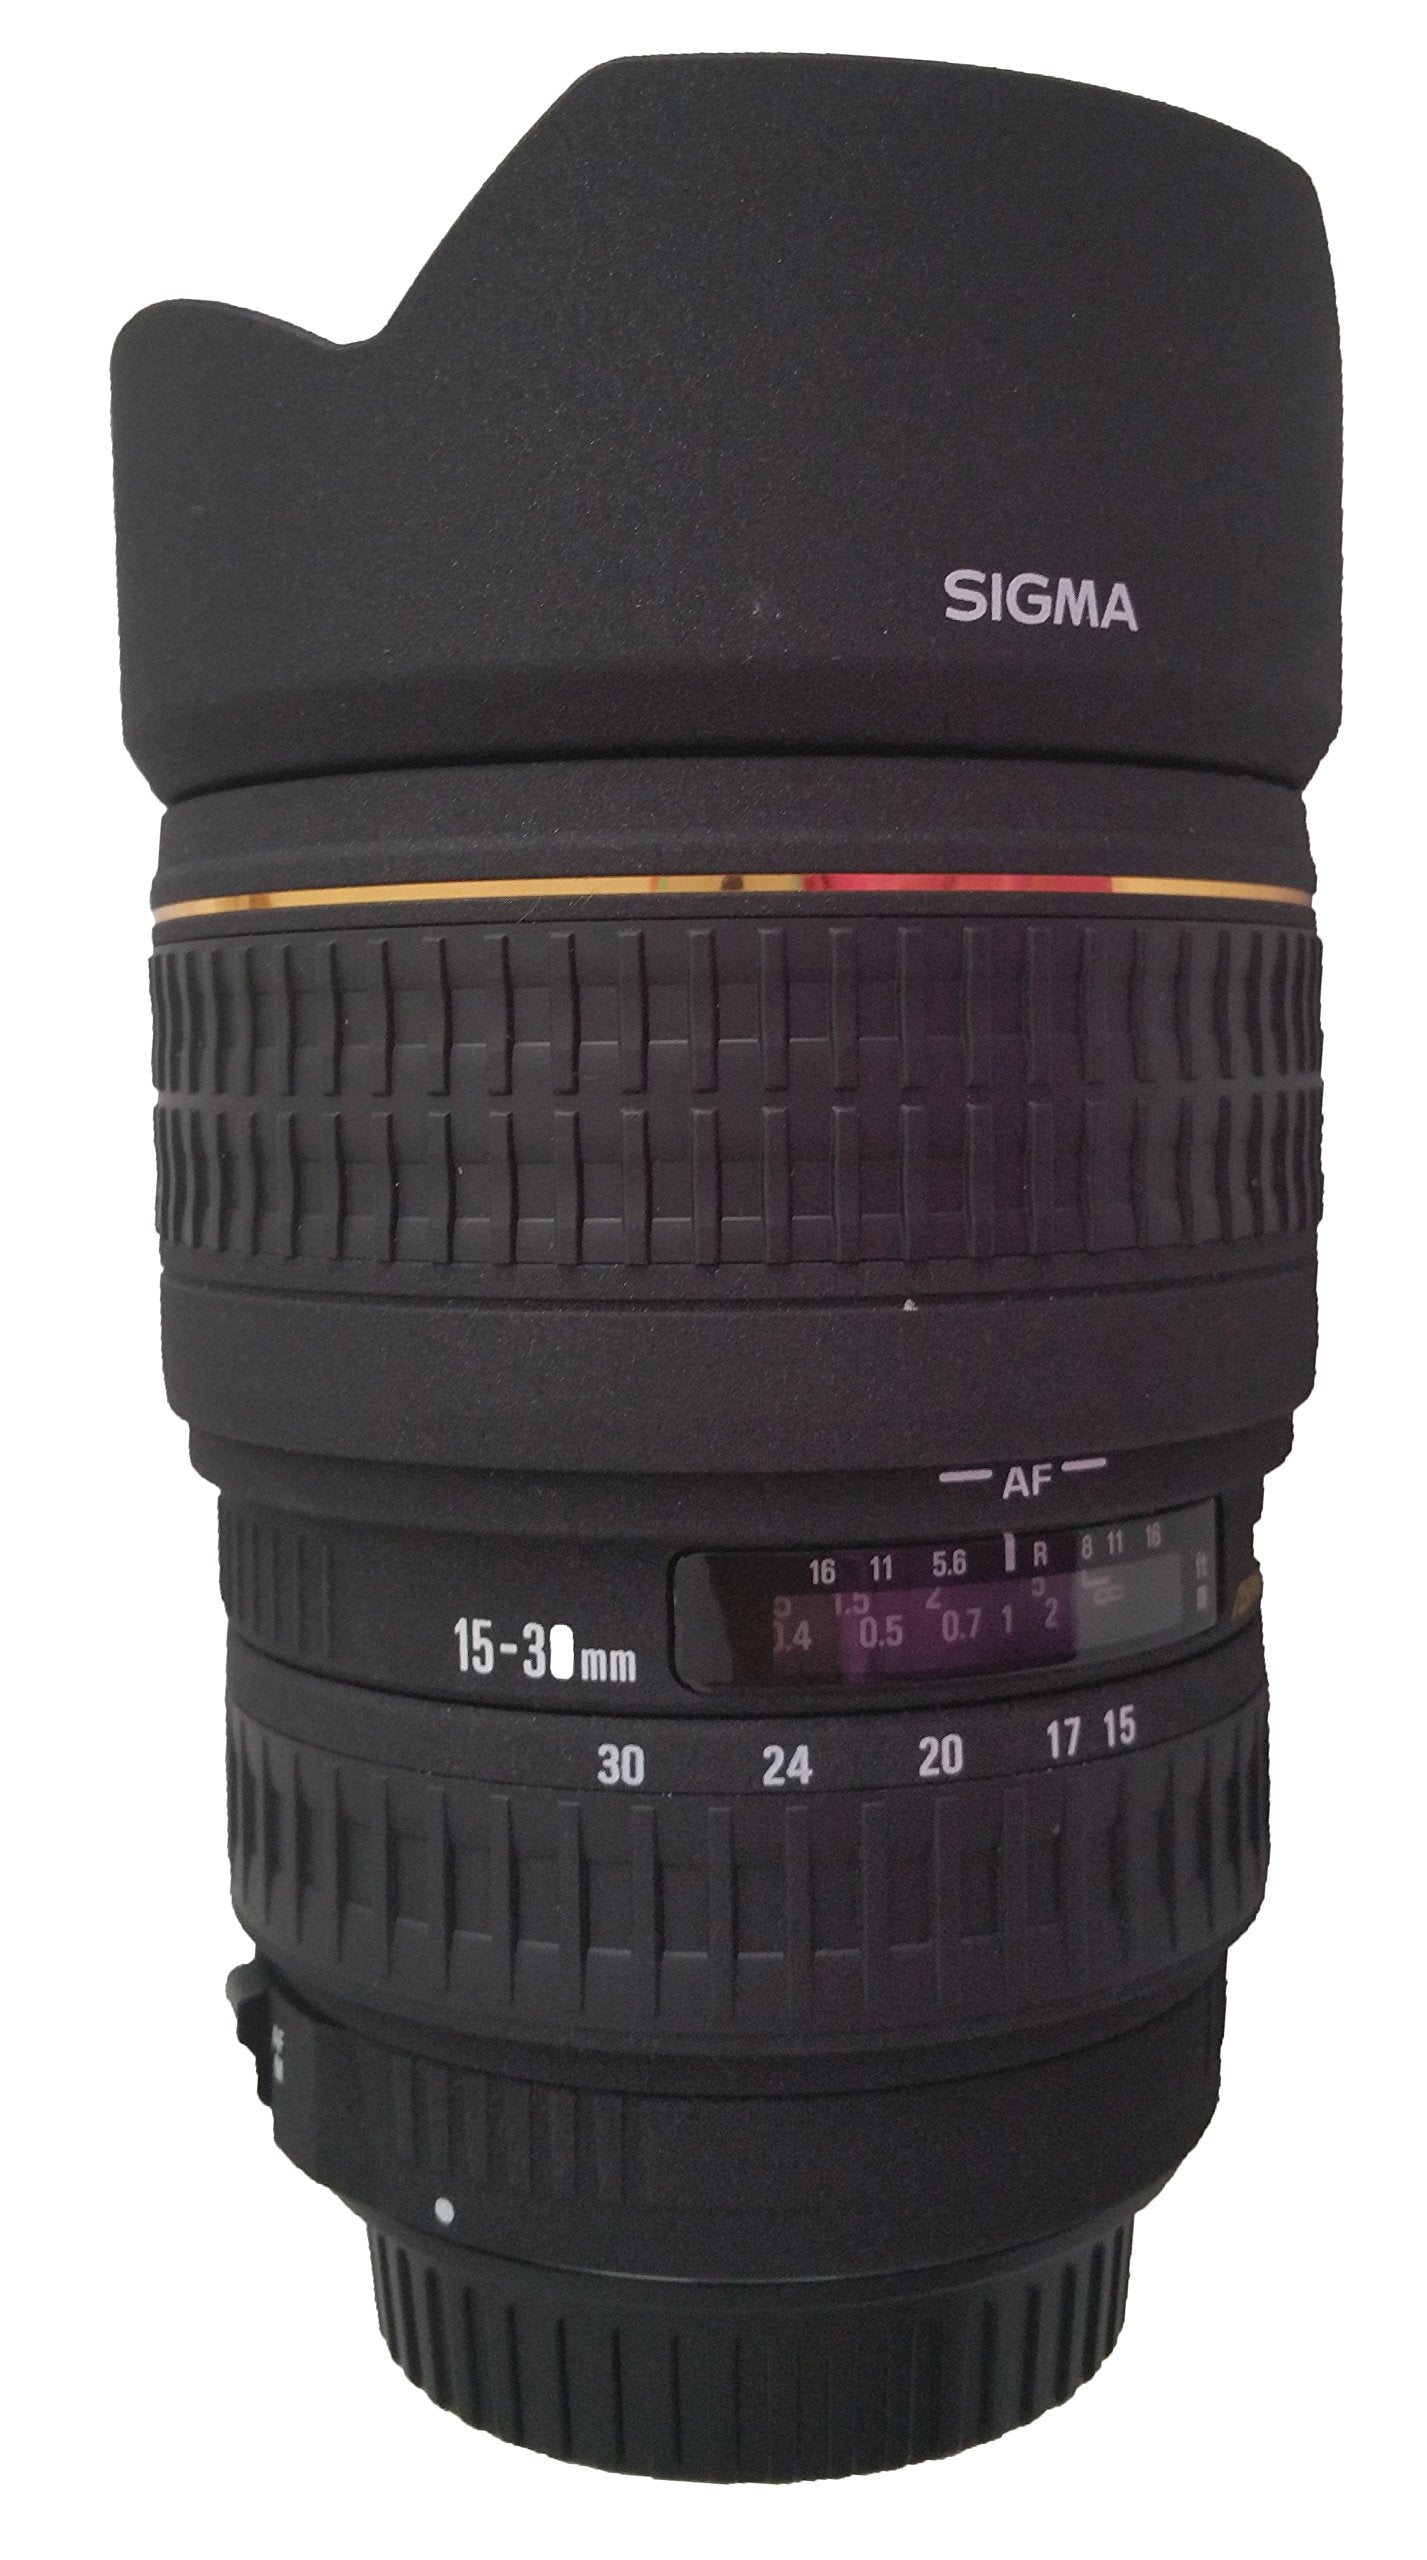 Sigma 15-30mm f/3.5-4.5 Ex Dg If Aspherical Ultra Wide Angle Zoom Lens for Canon